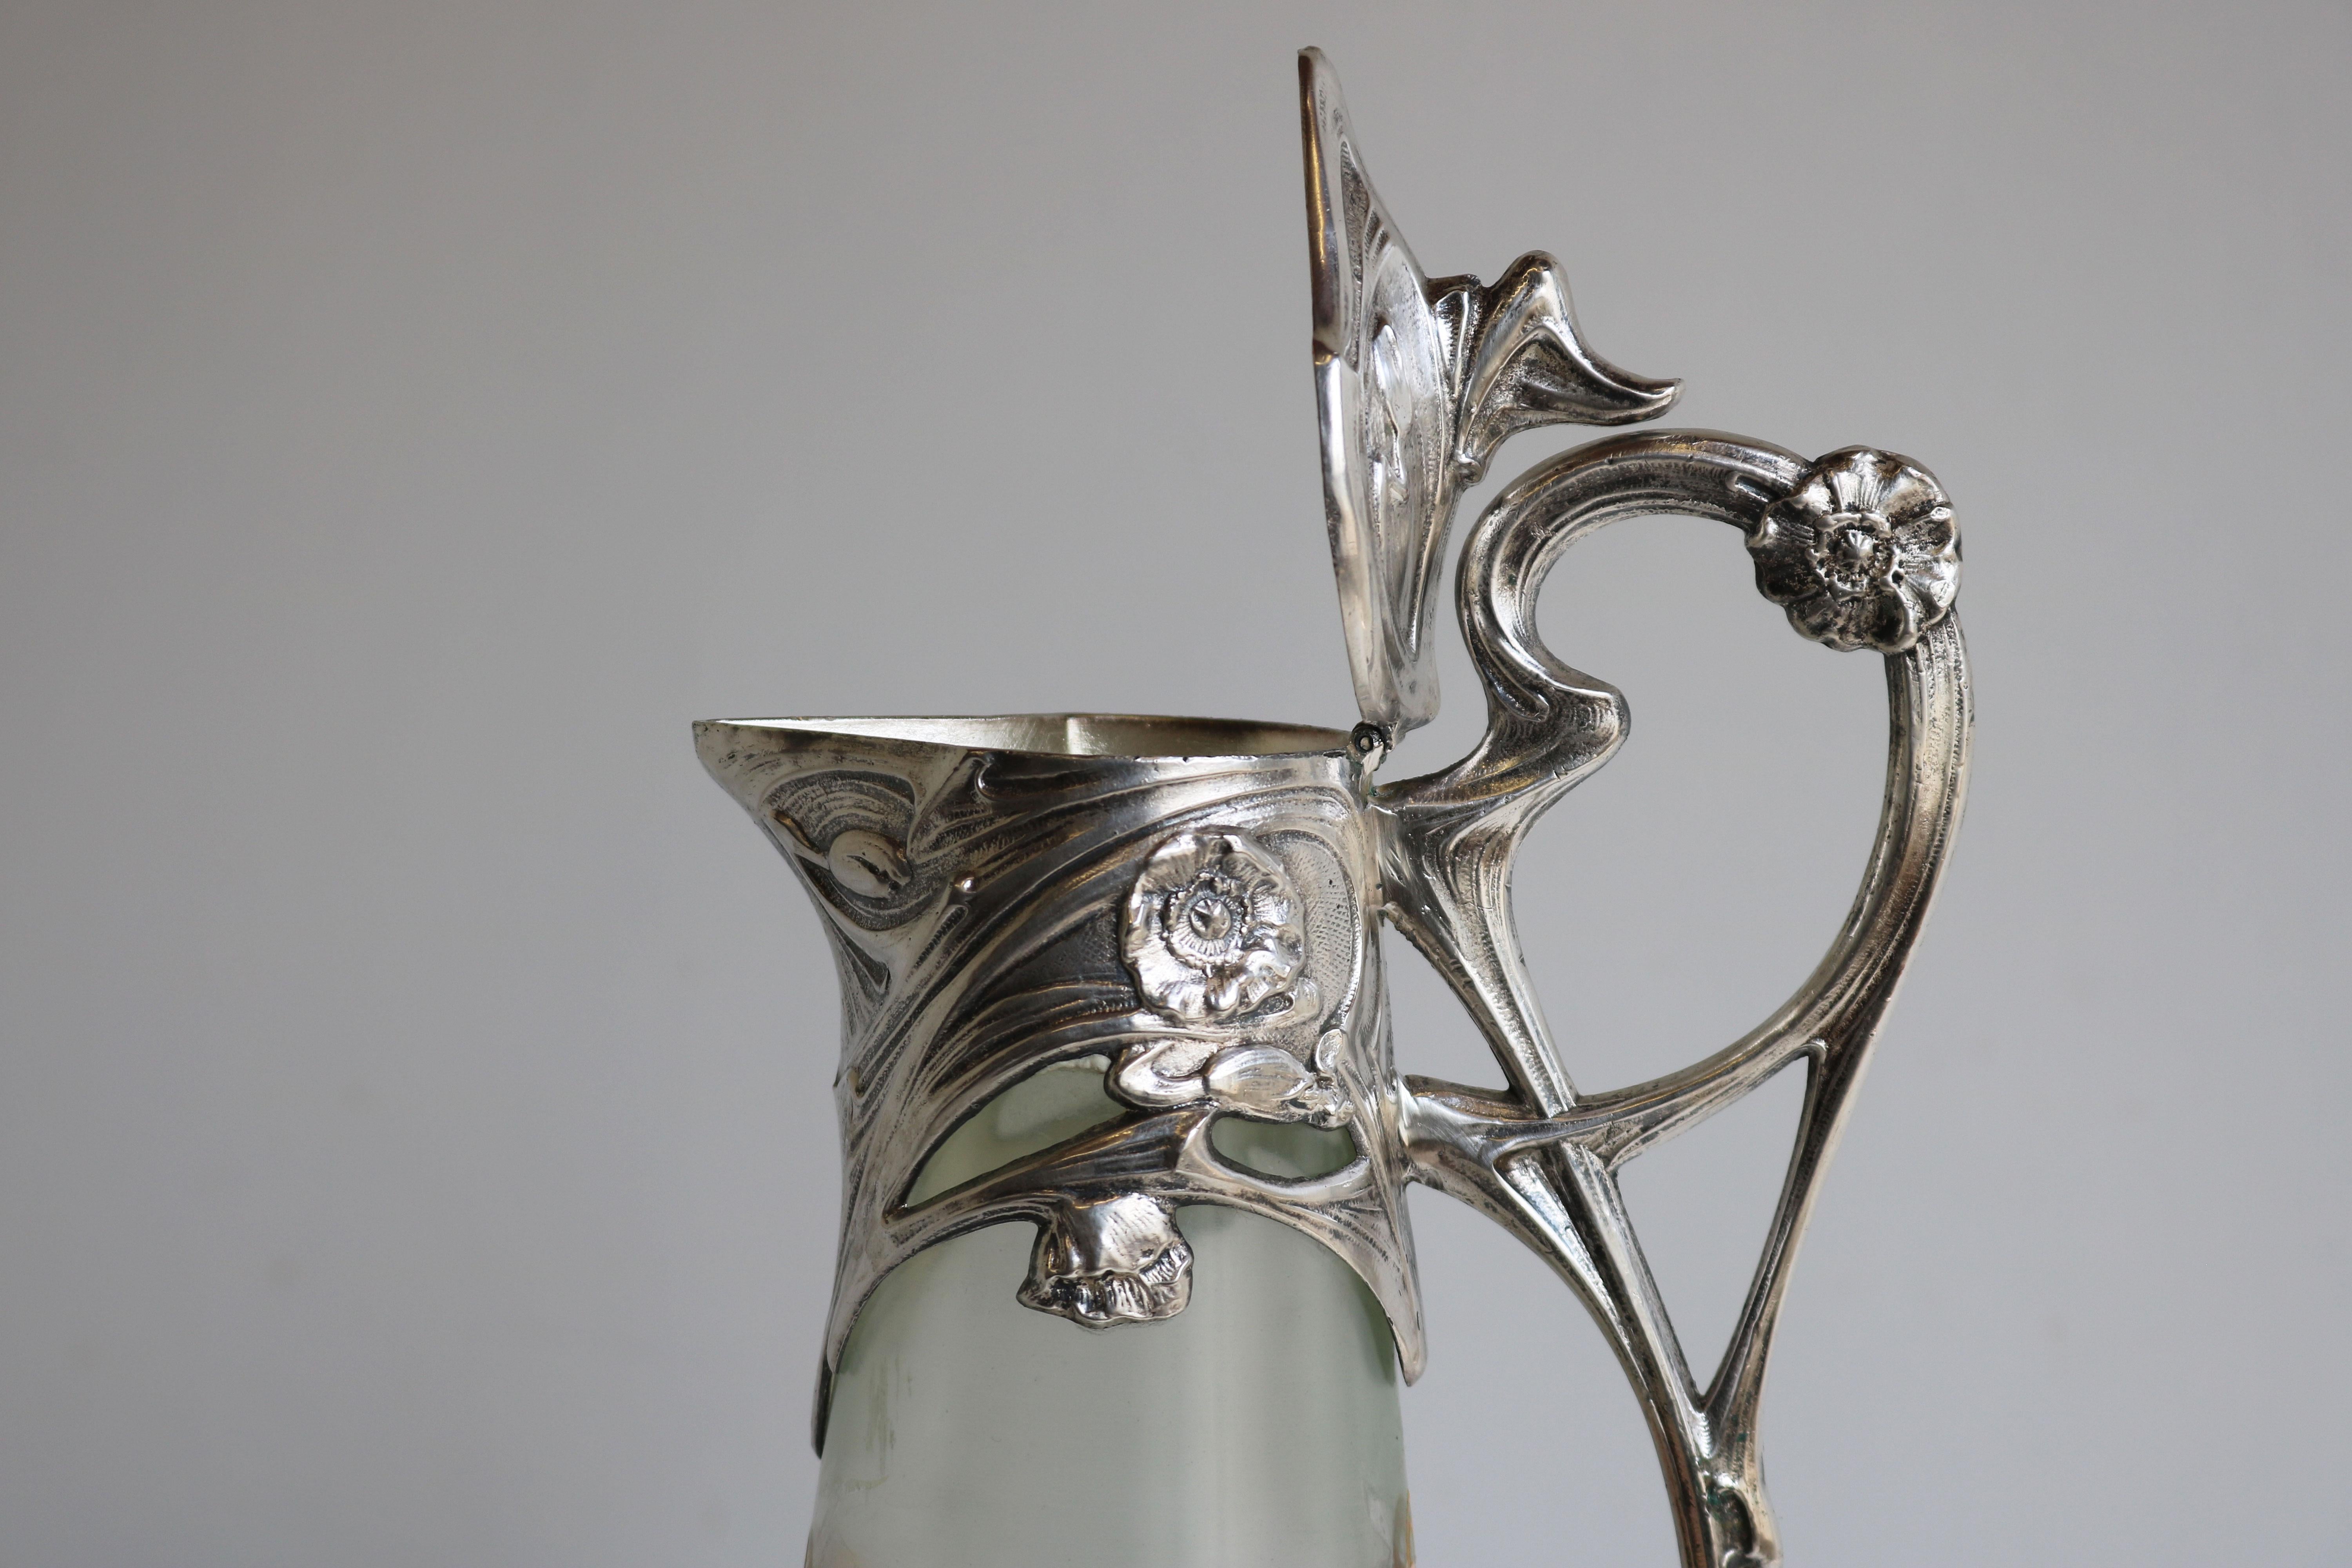 Silver Plate Exquisite French Art Nouveau Decanter / Pitcher by J. Barian Silver Glass 1900 For Sale